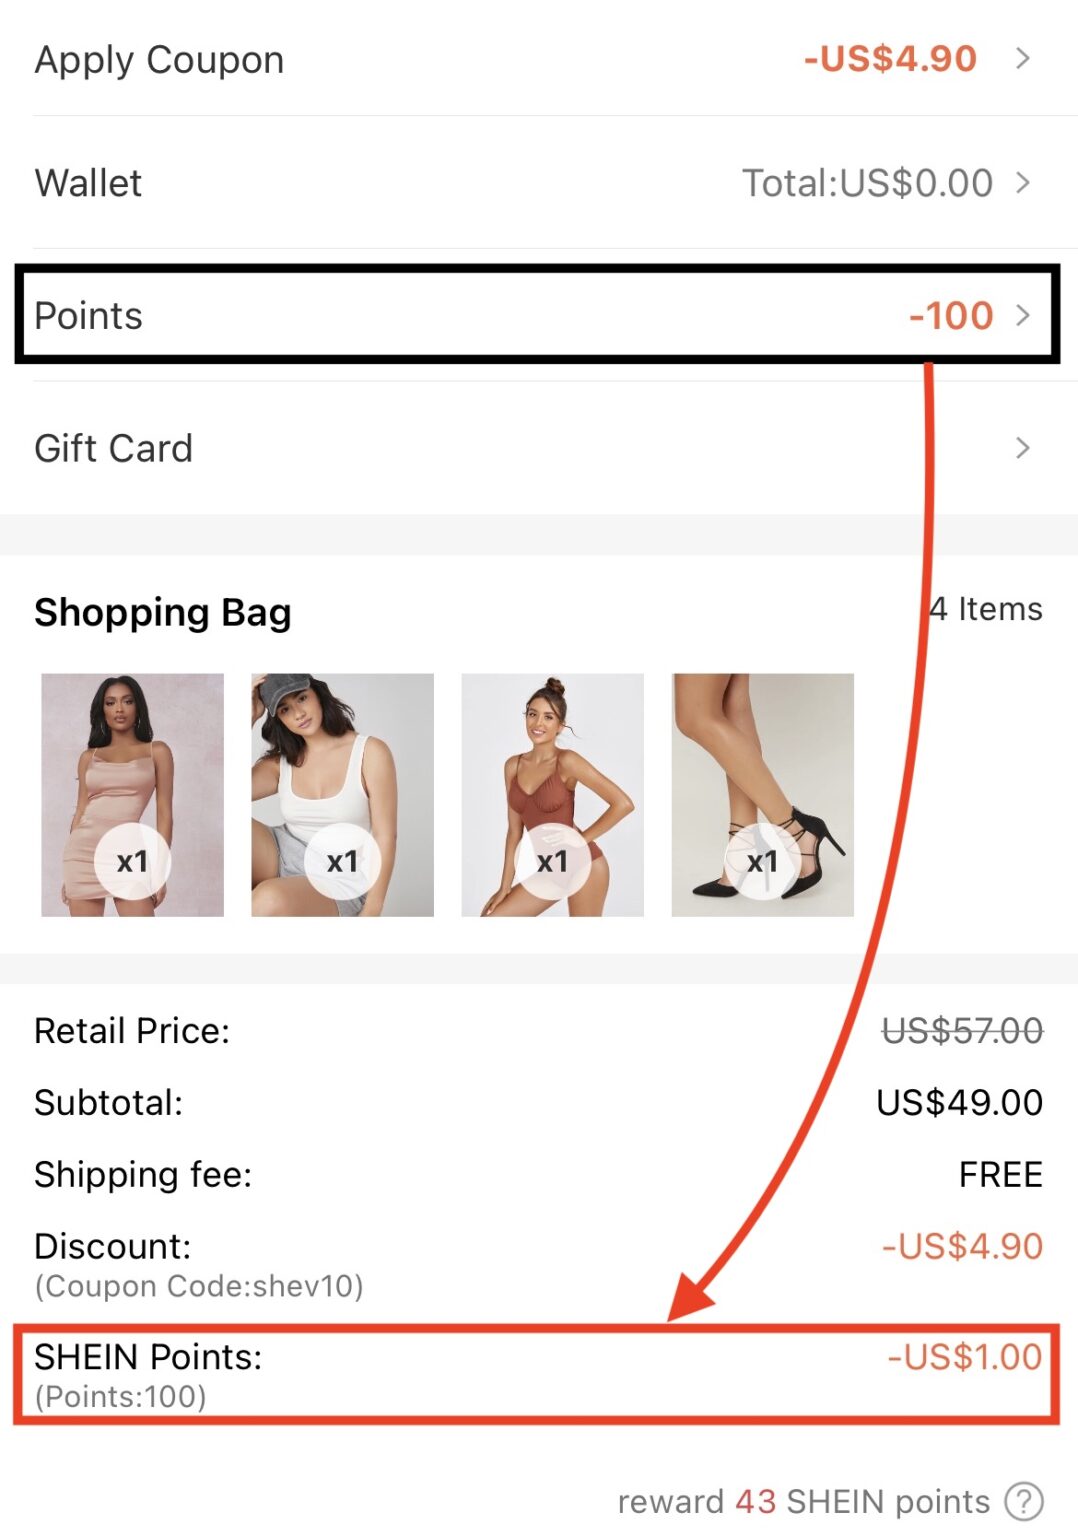 How to get unlimited shein points